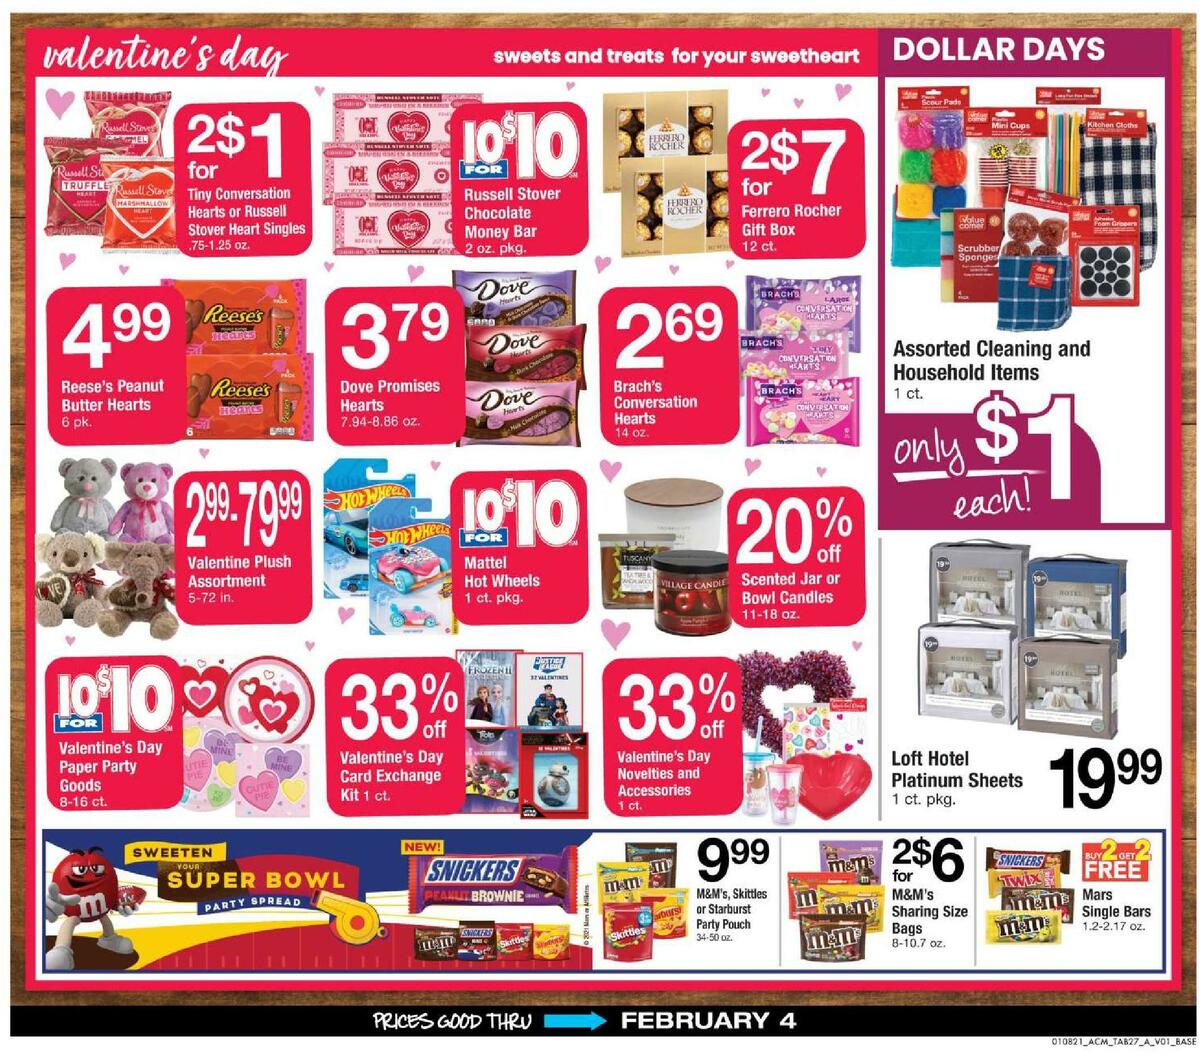 ACME Markets Big Book Weekly Ad from January 8